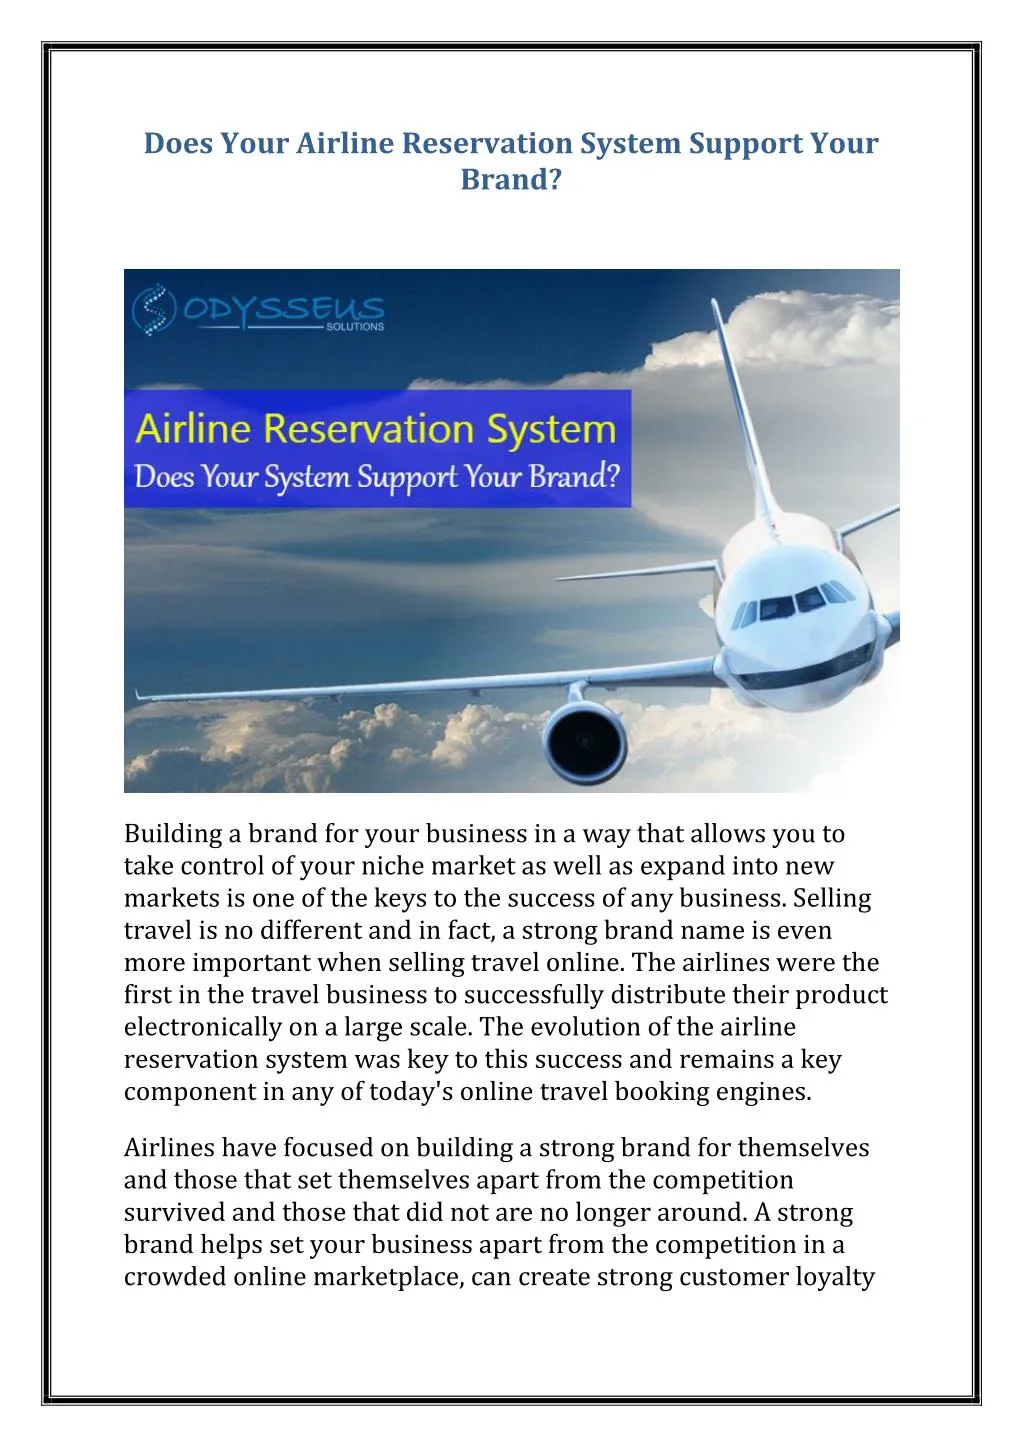 does your airline reservation system support your